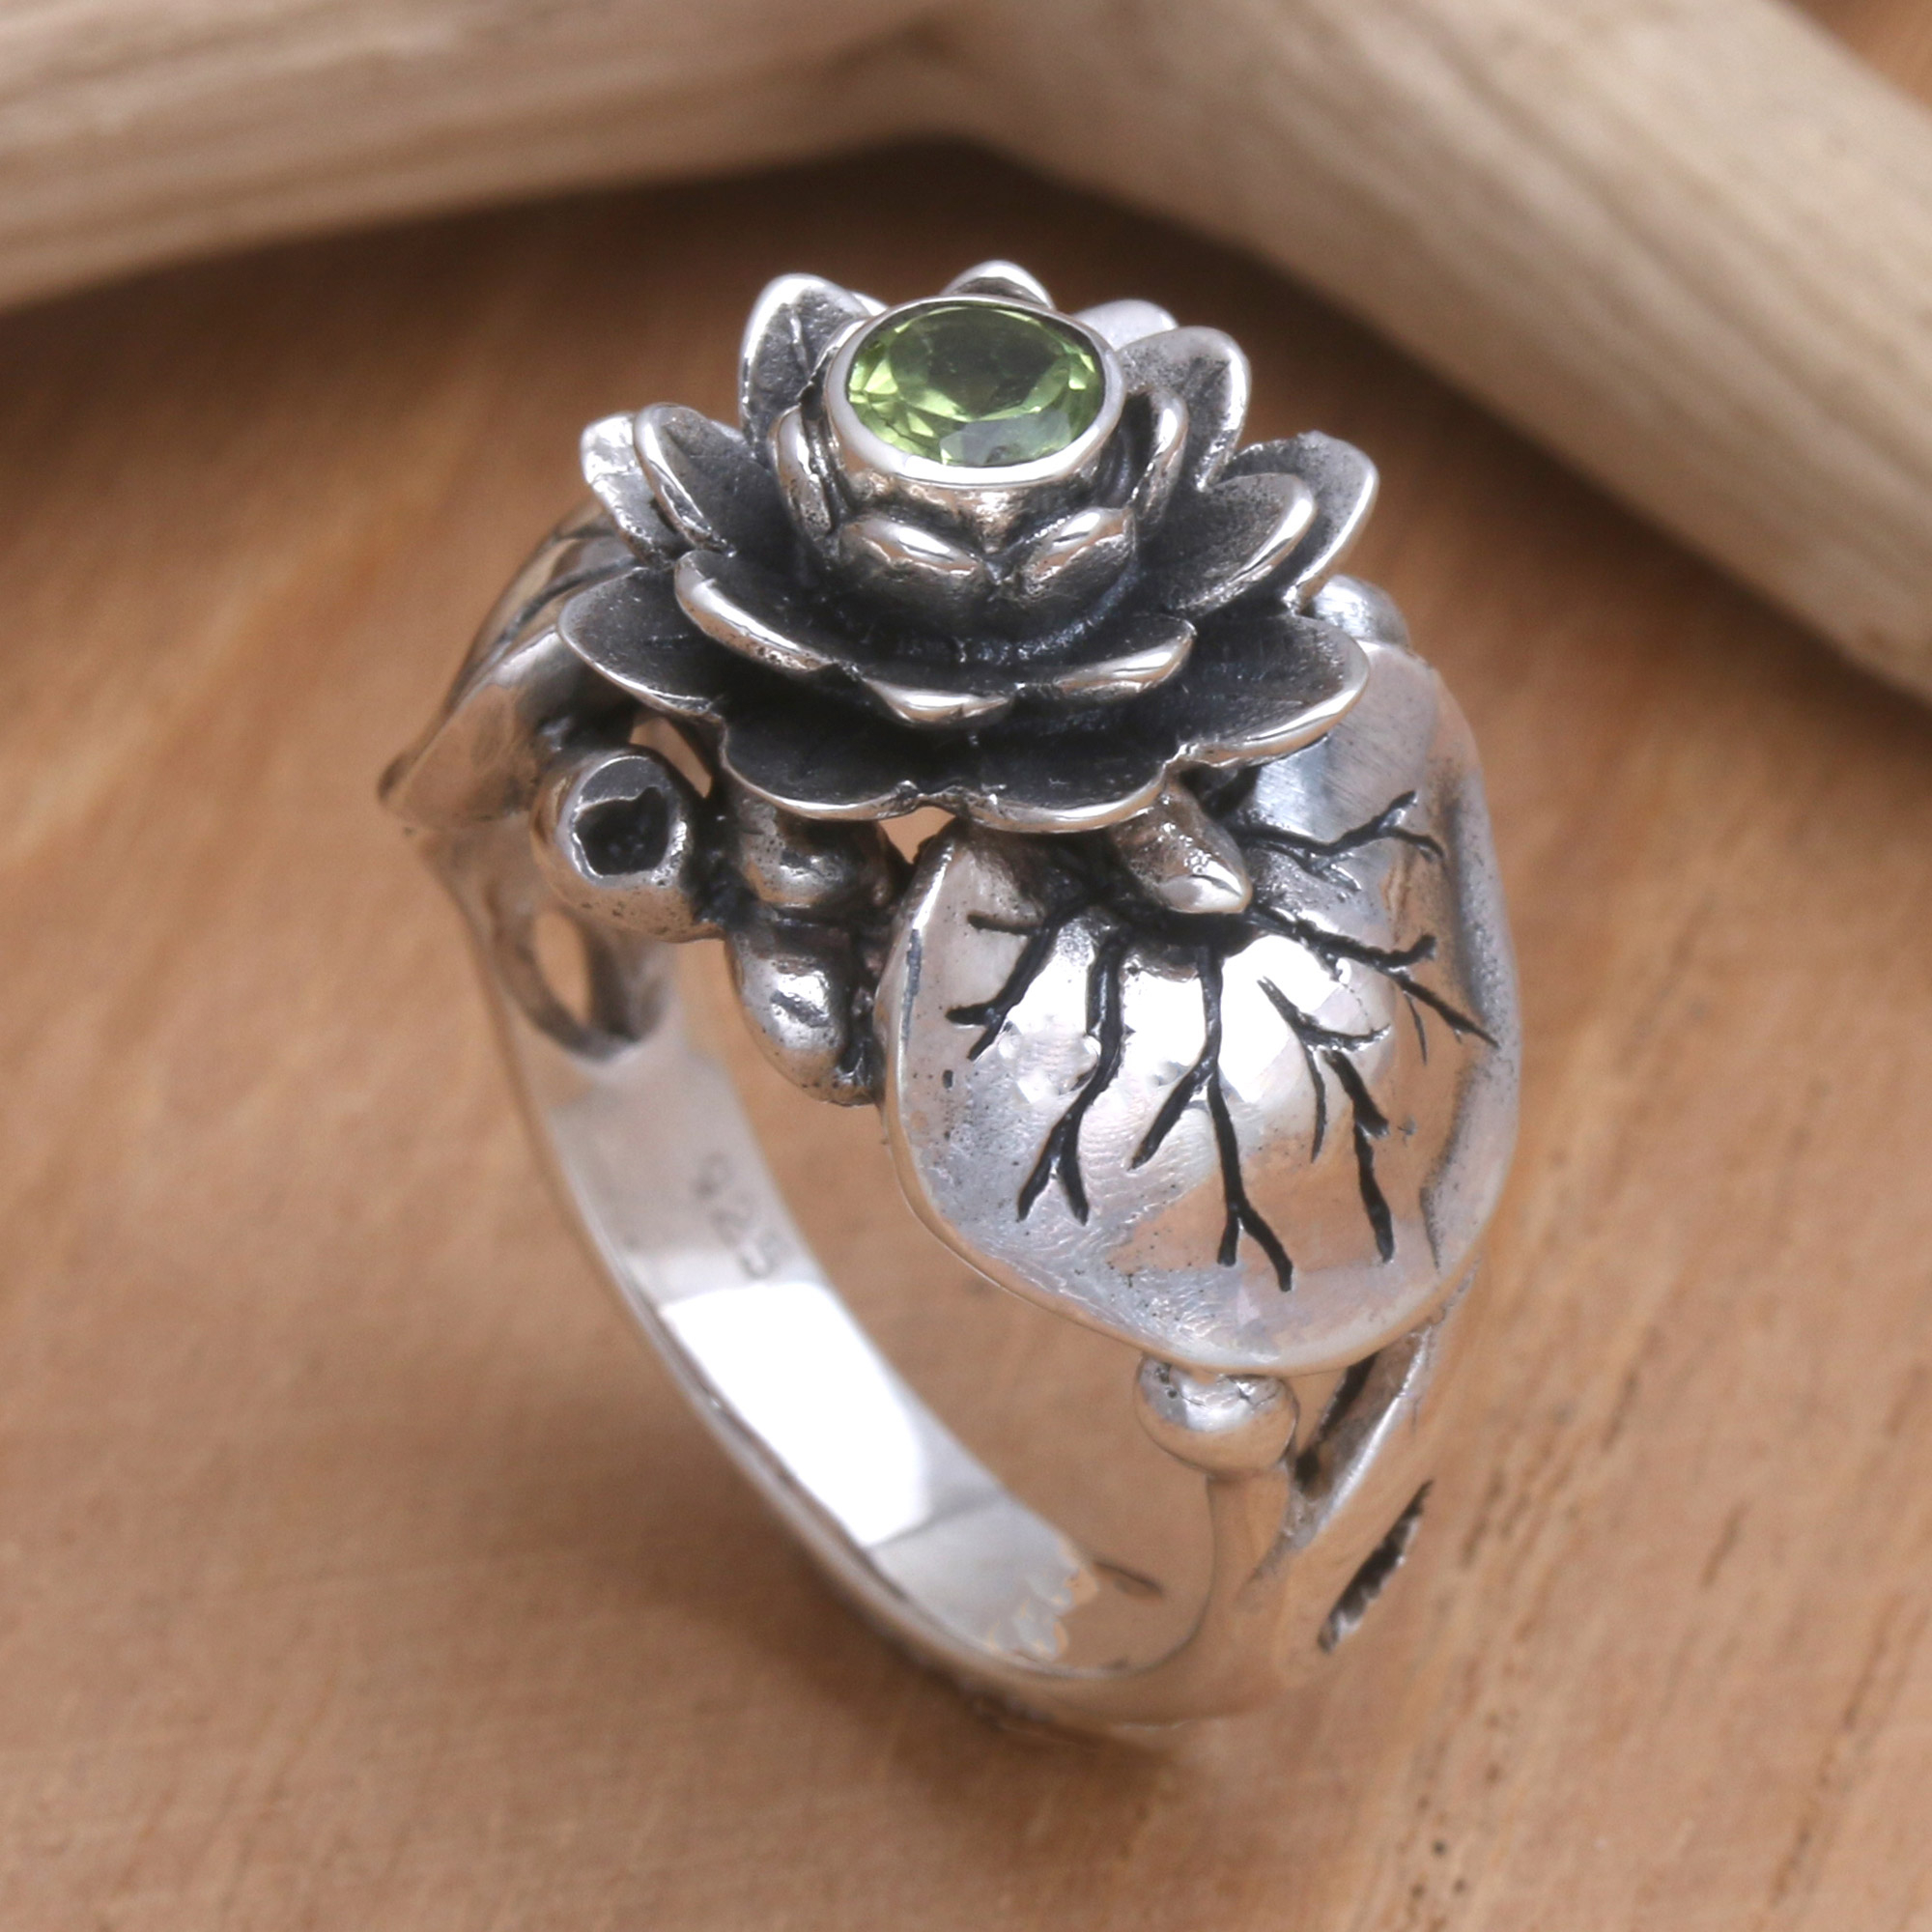 Handcrafted Peridot and Sterling Silver Ring - Lotus Purity | NOVICA